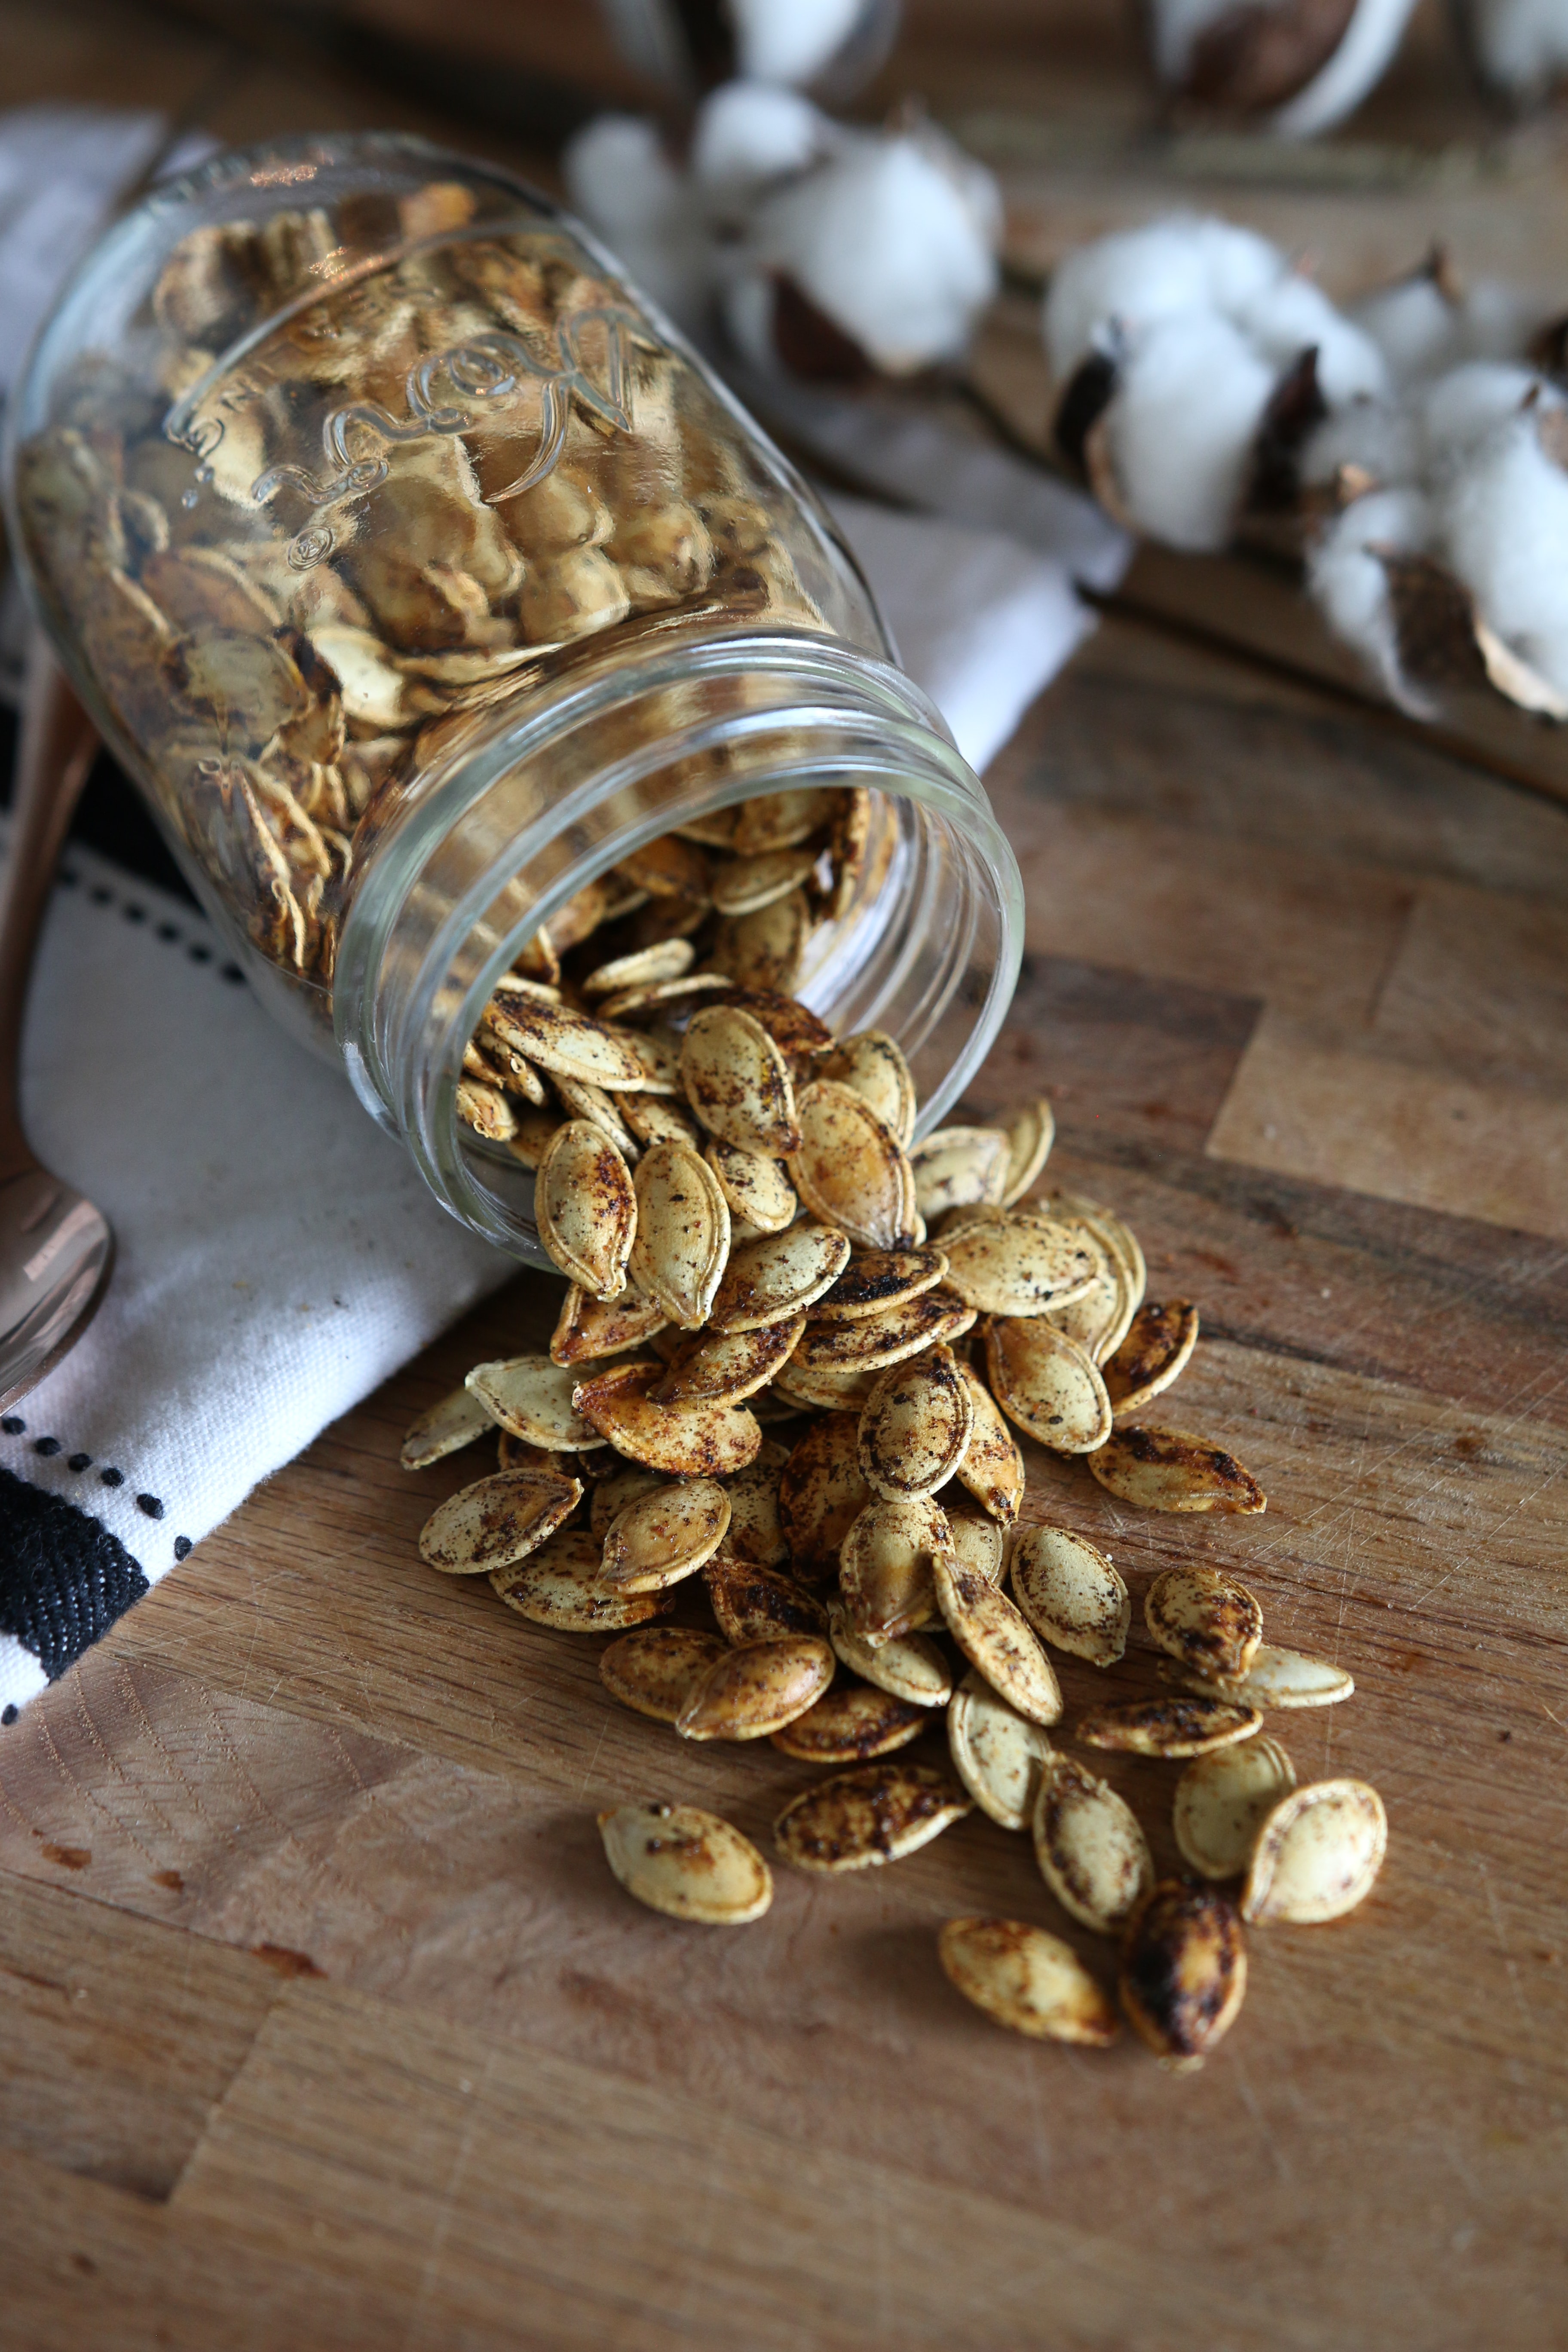 Photograph of a jar tipped over onto a table, spilling out pumpkin seeds